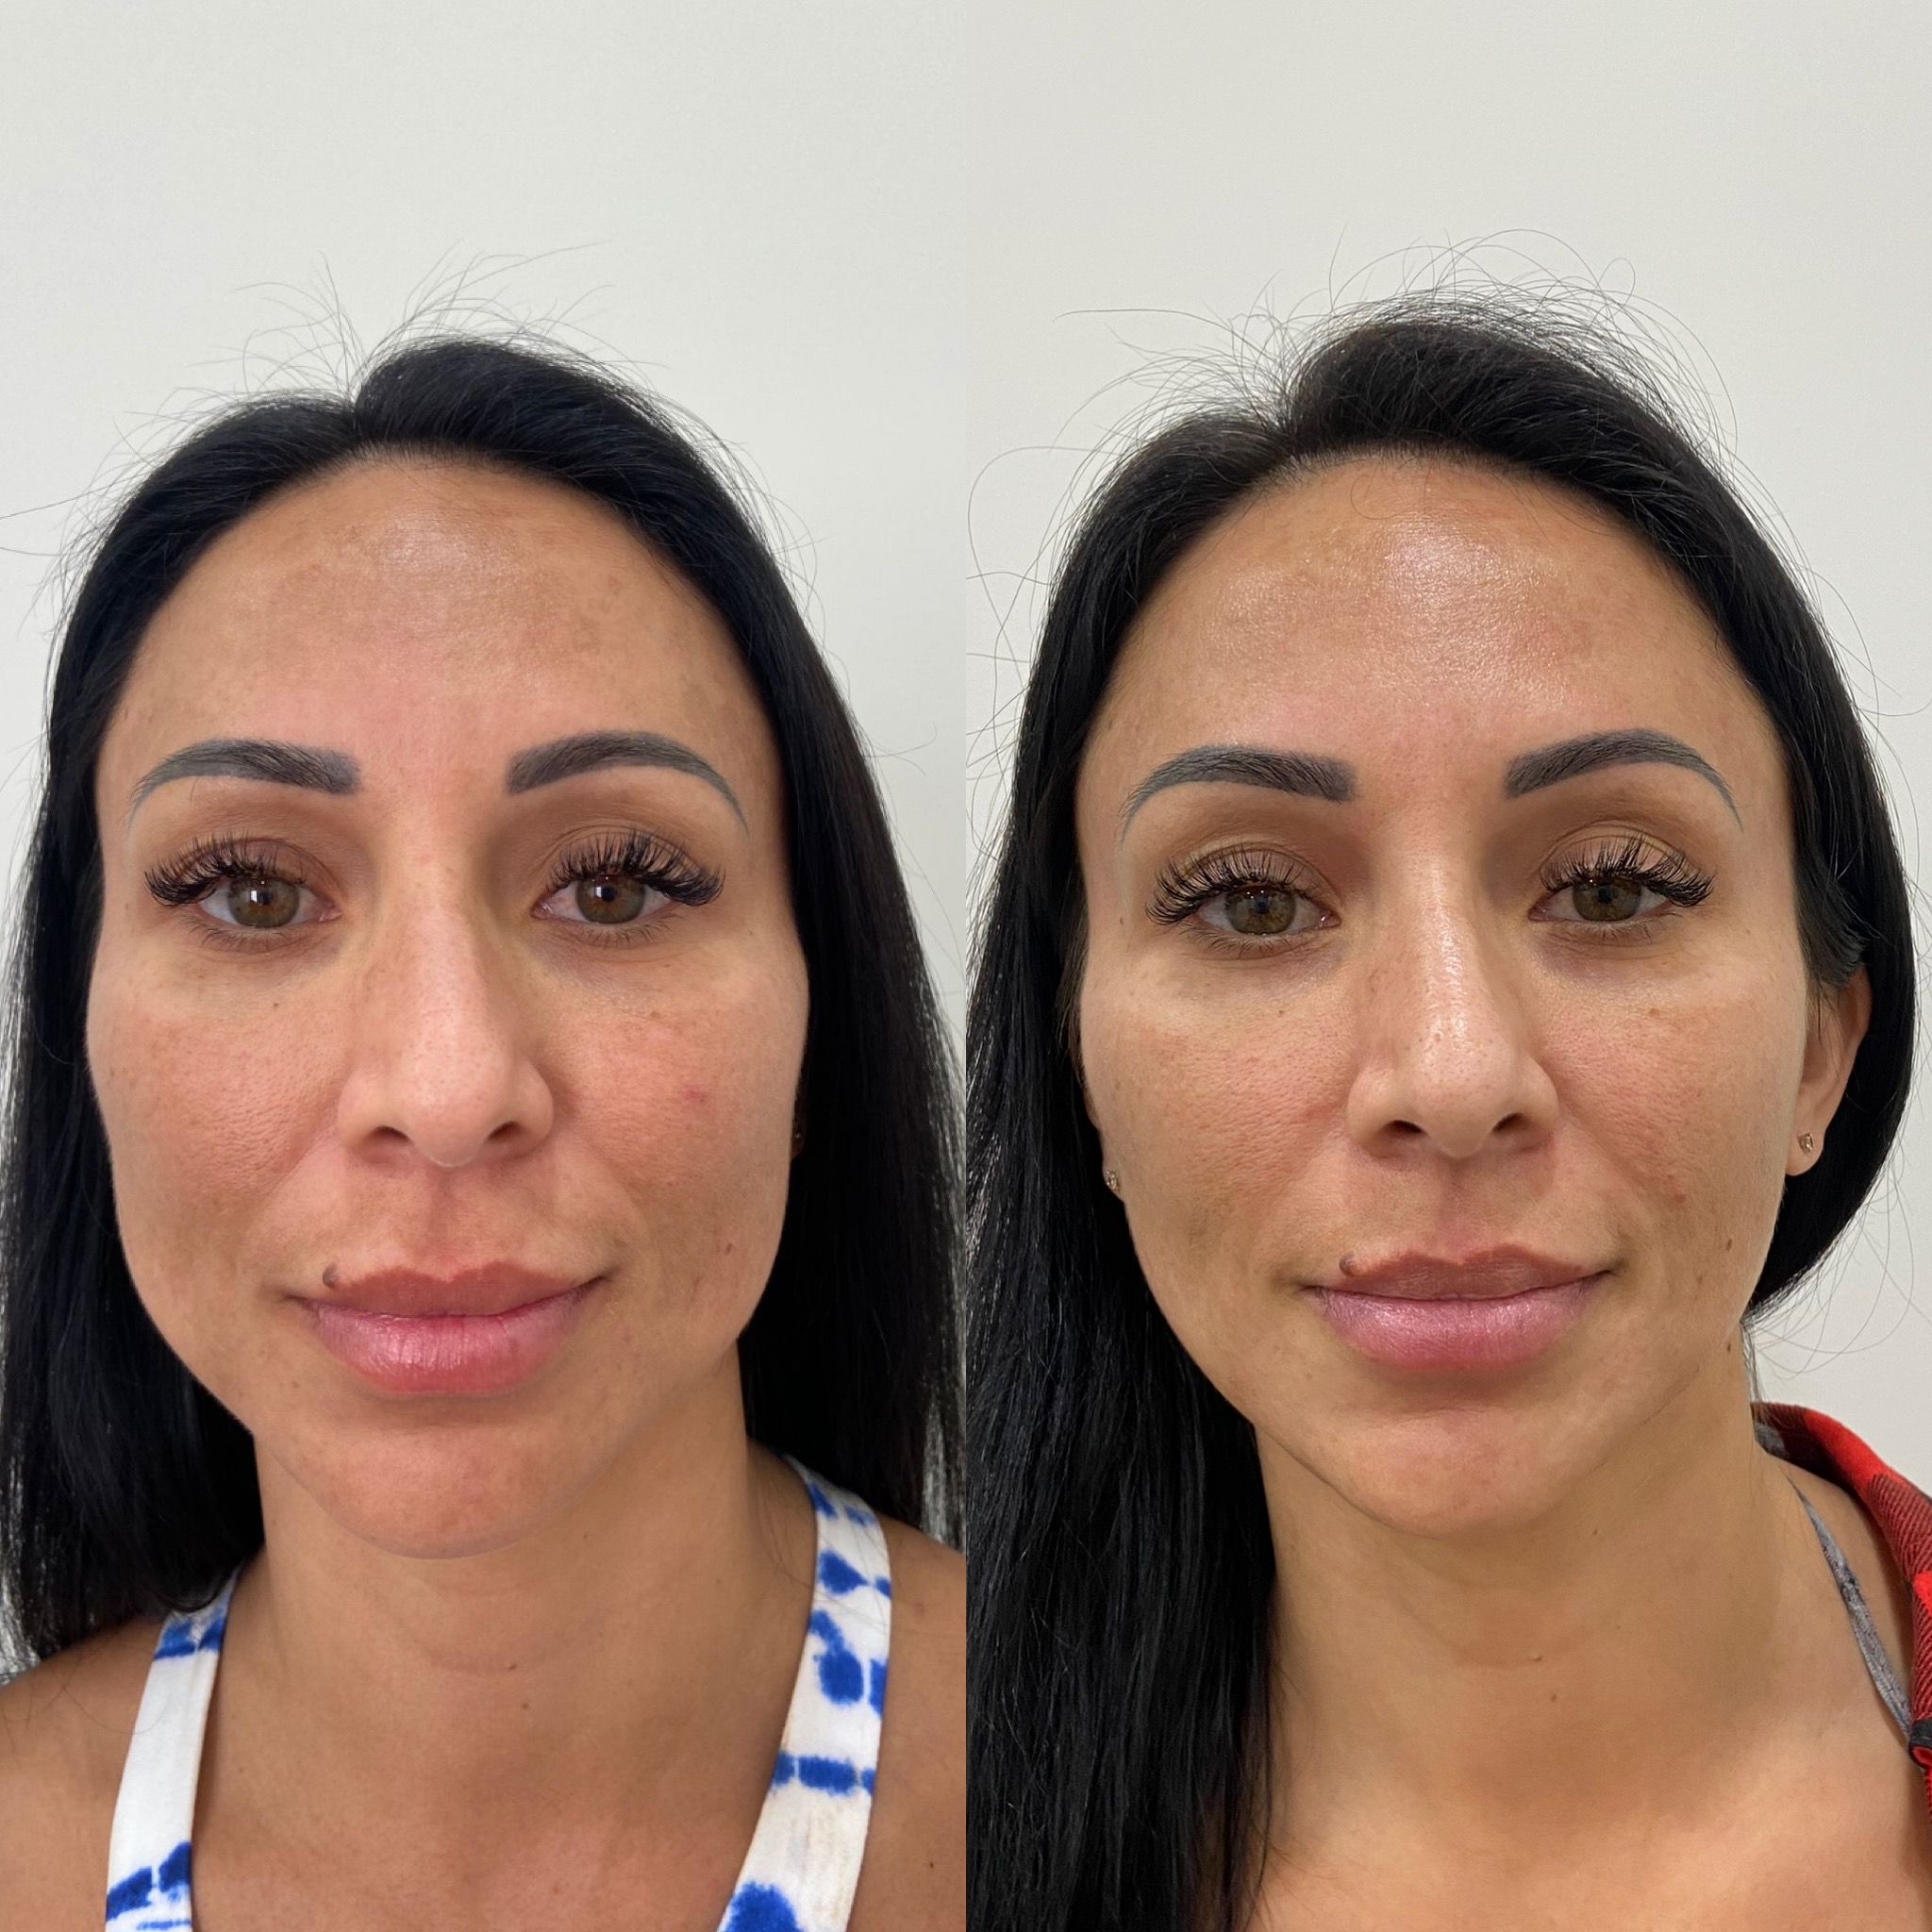 Before and After Skincare Treatment | Beauty Boost Med Spa in Newport Beach, CA